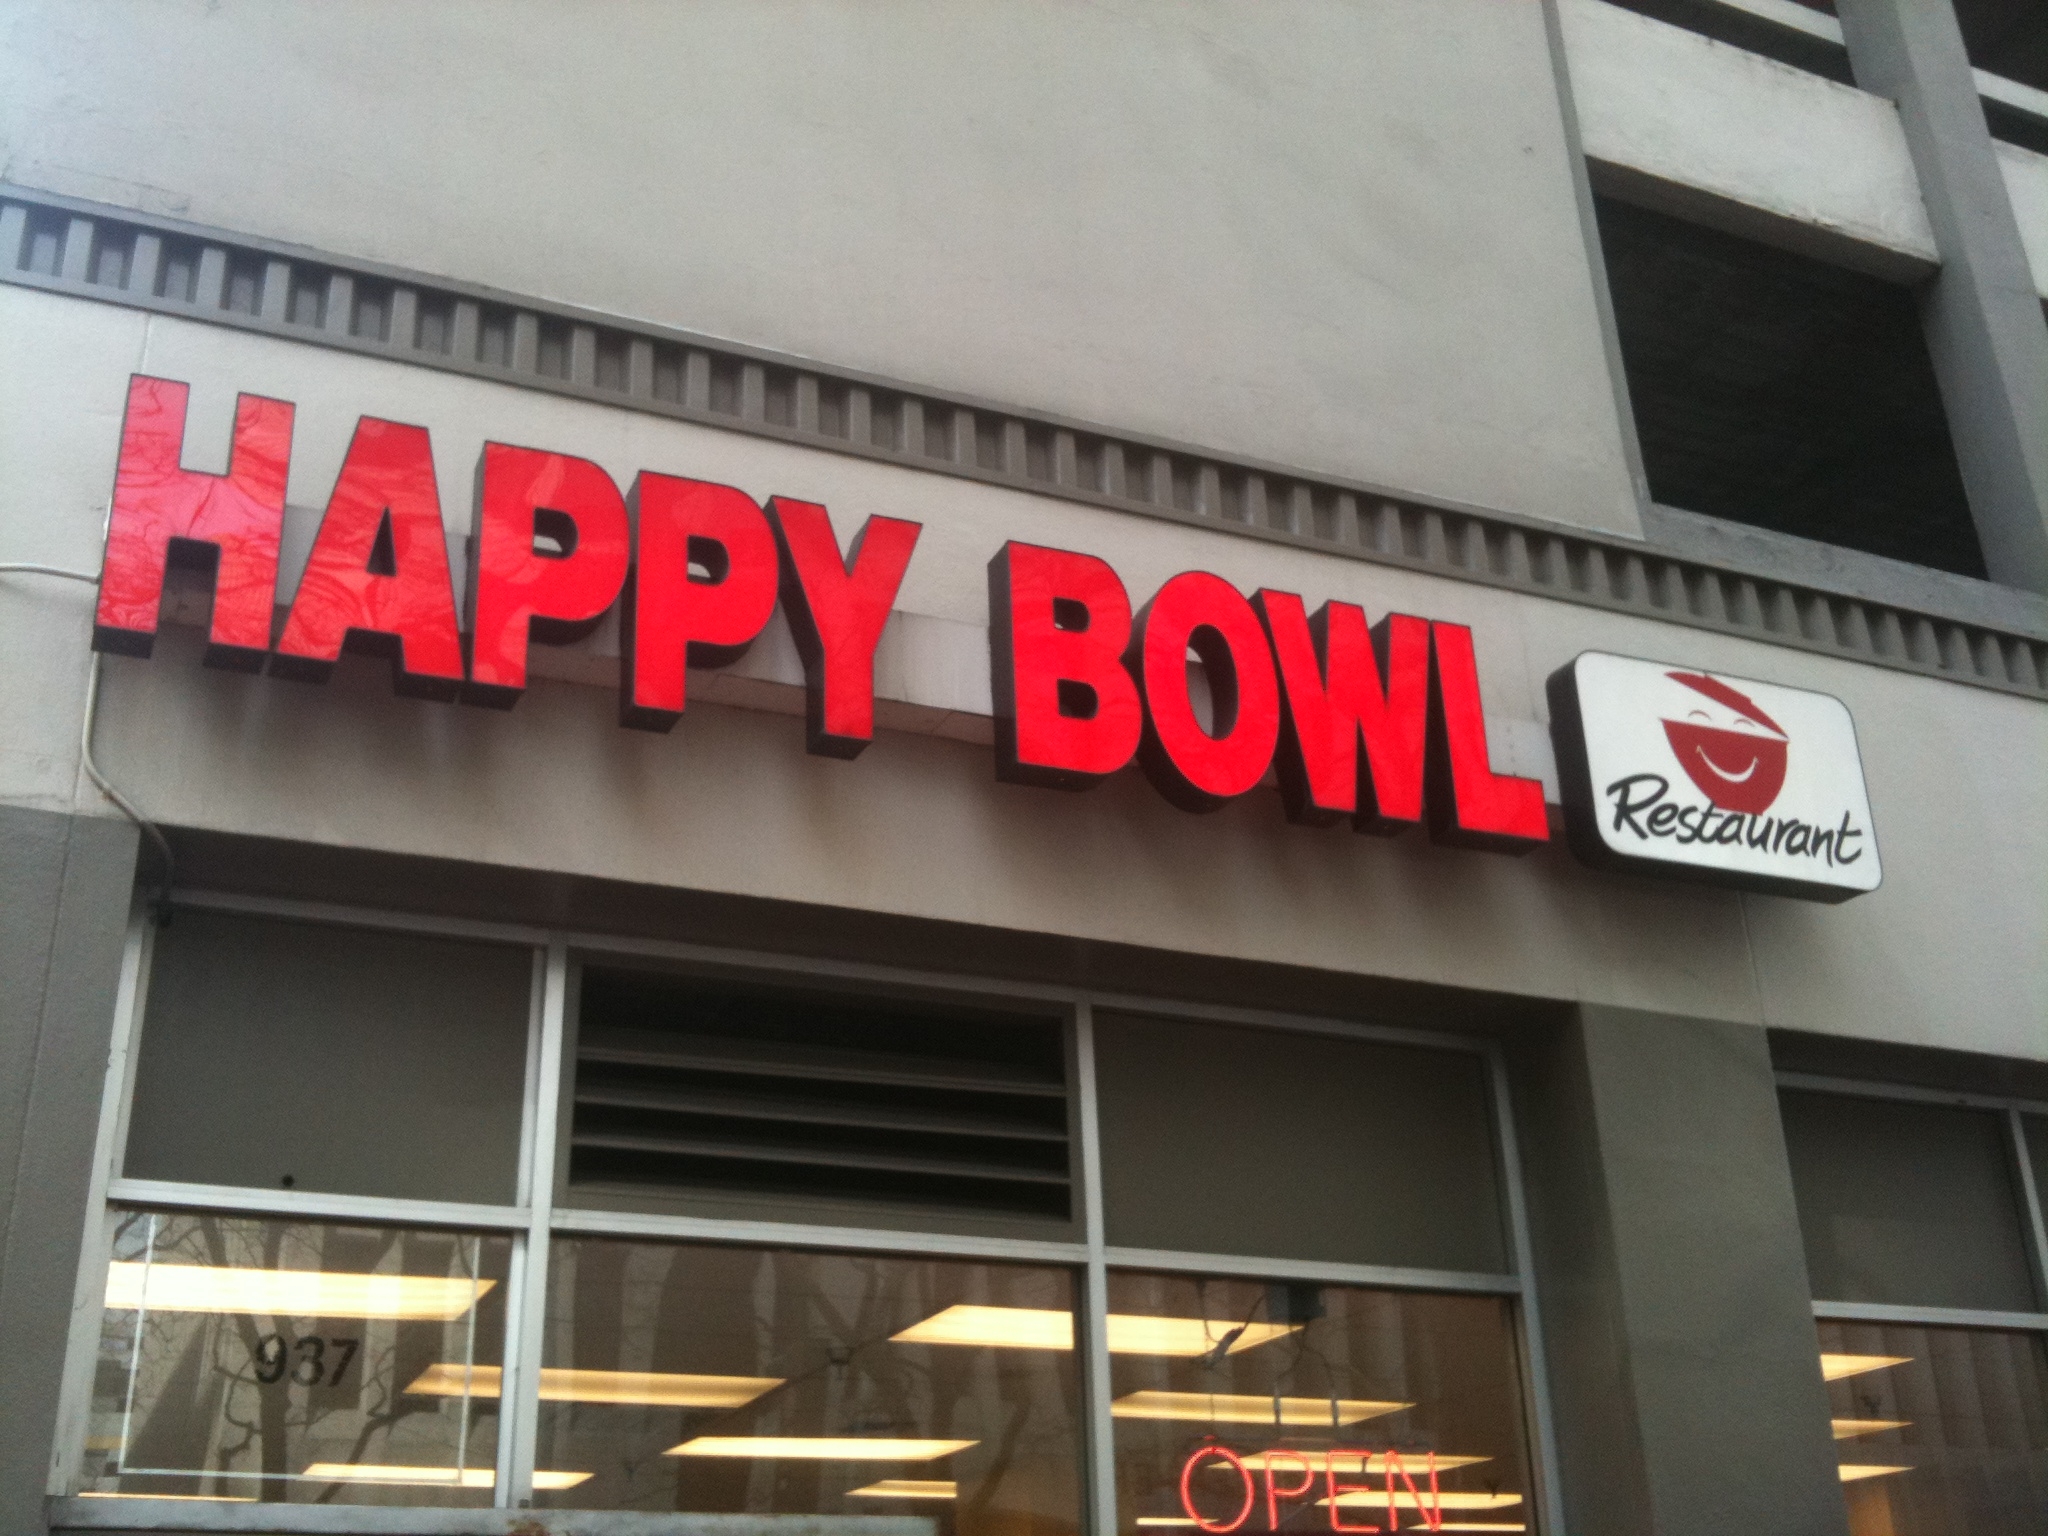 What do you do before you go to Happy Bowl?